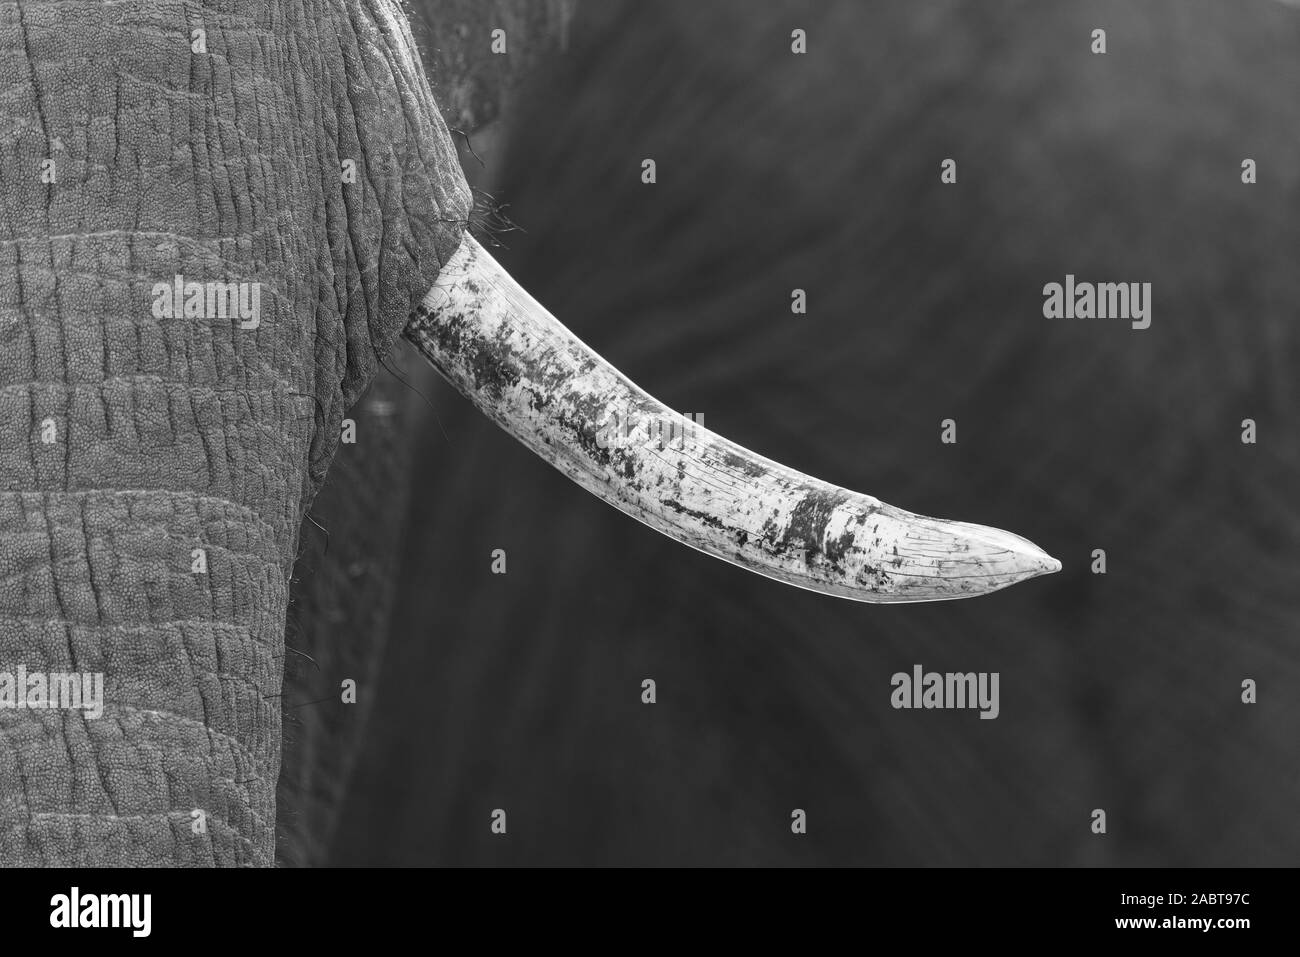 close up picture of the tusk of a elephant Stock Photo